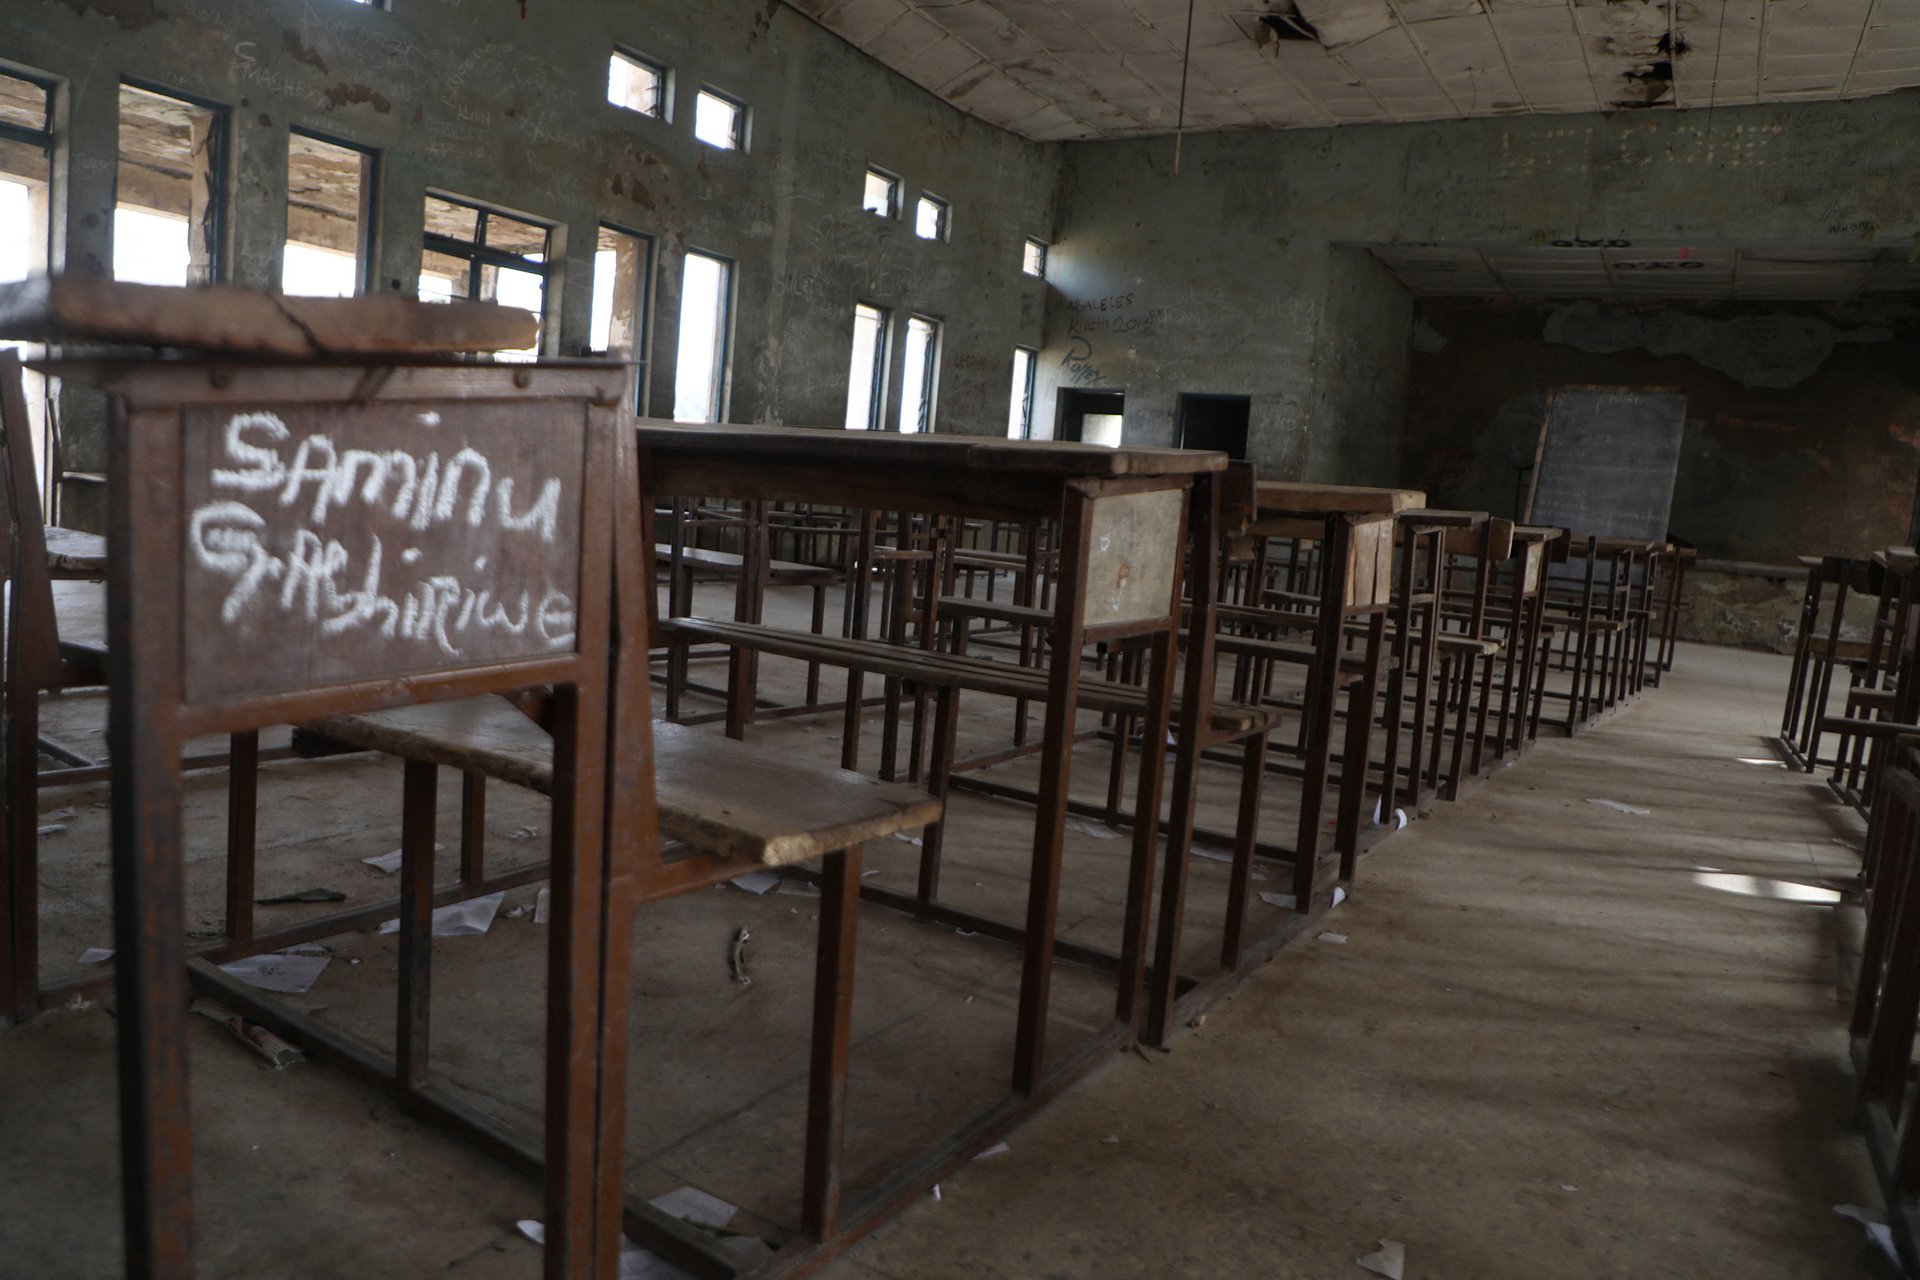 A classroom stands empty at the Government Secondary Science School in Kagara, Niger State, Nigeria. The day before, gunmen had abducted an estimated 27 students from the school. One student was killed during the raid.